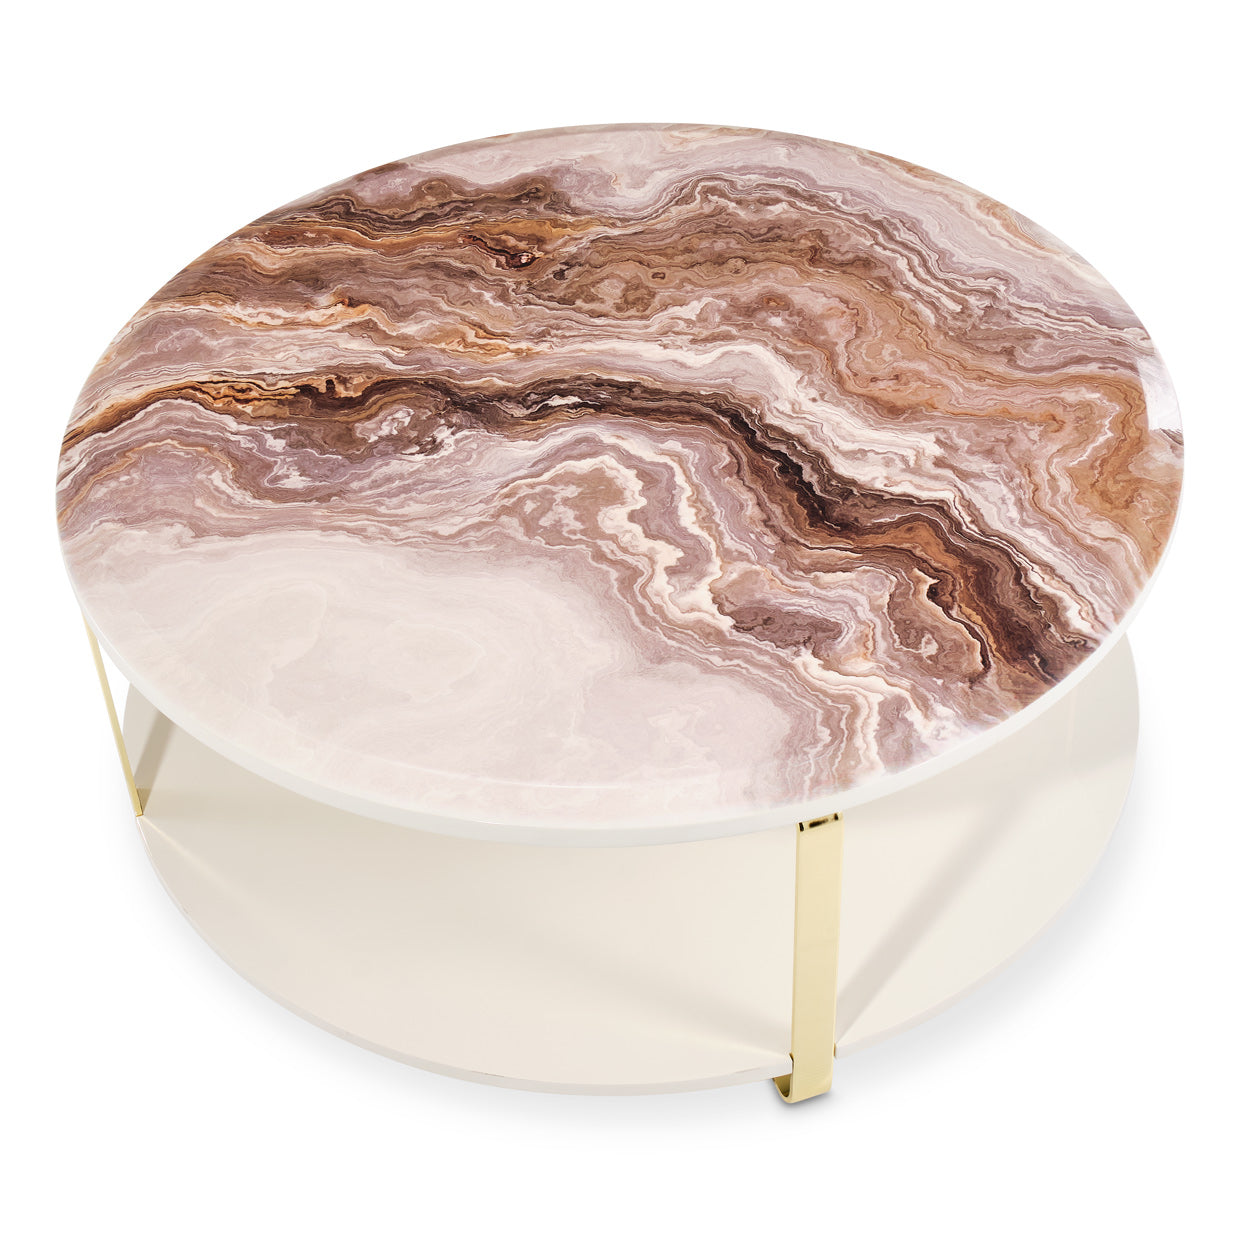 Ariana Cocktail Table, Living room transformation, Faux marble top, Golden legs, Sheer, elegance, Functional lower shelf, Storage, Glamorous centerpiece, Impressing guests, Ready to impress, Select items, dream art, michael amini